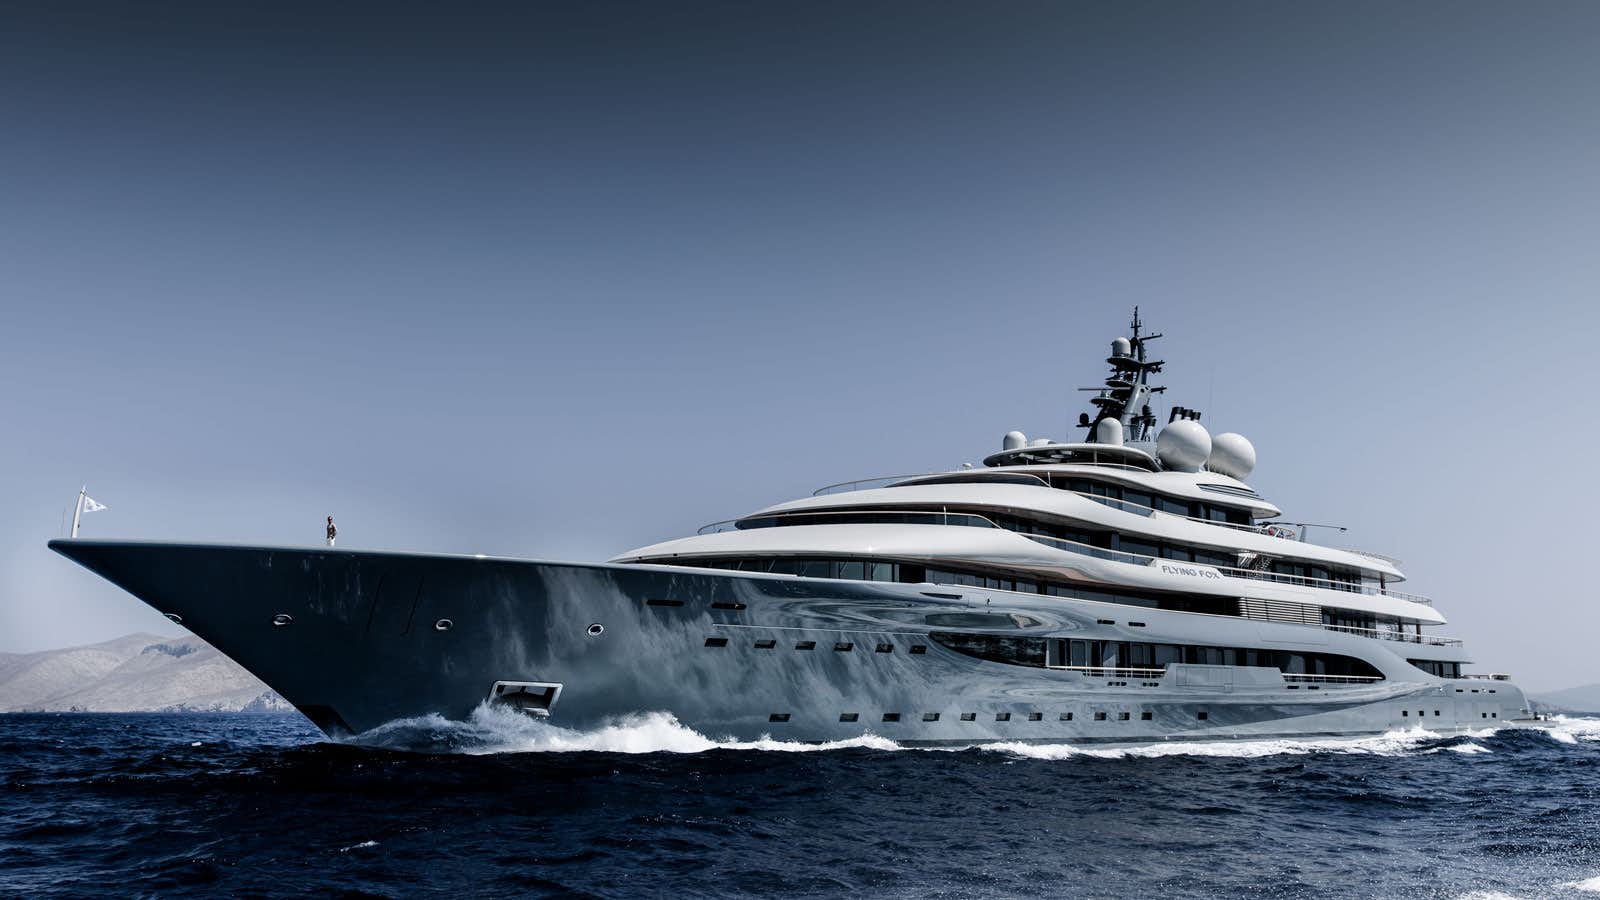 luxurious yacht in the world